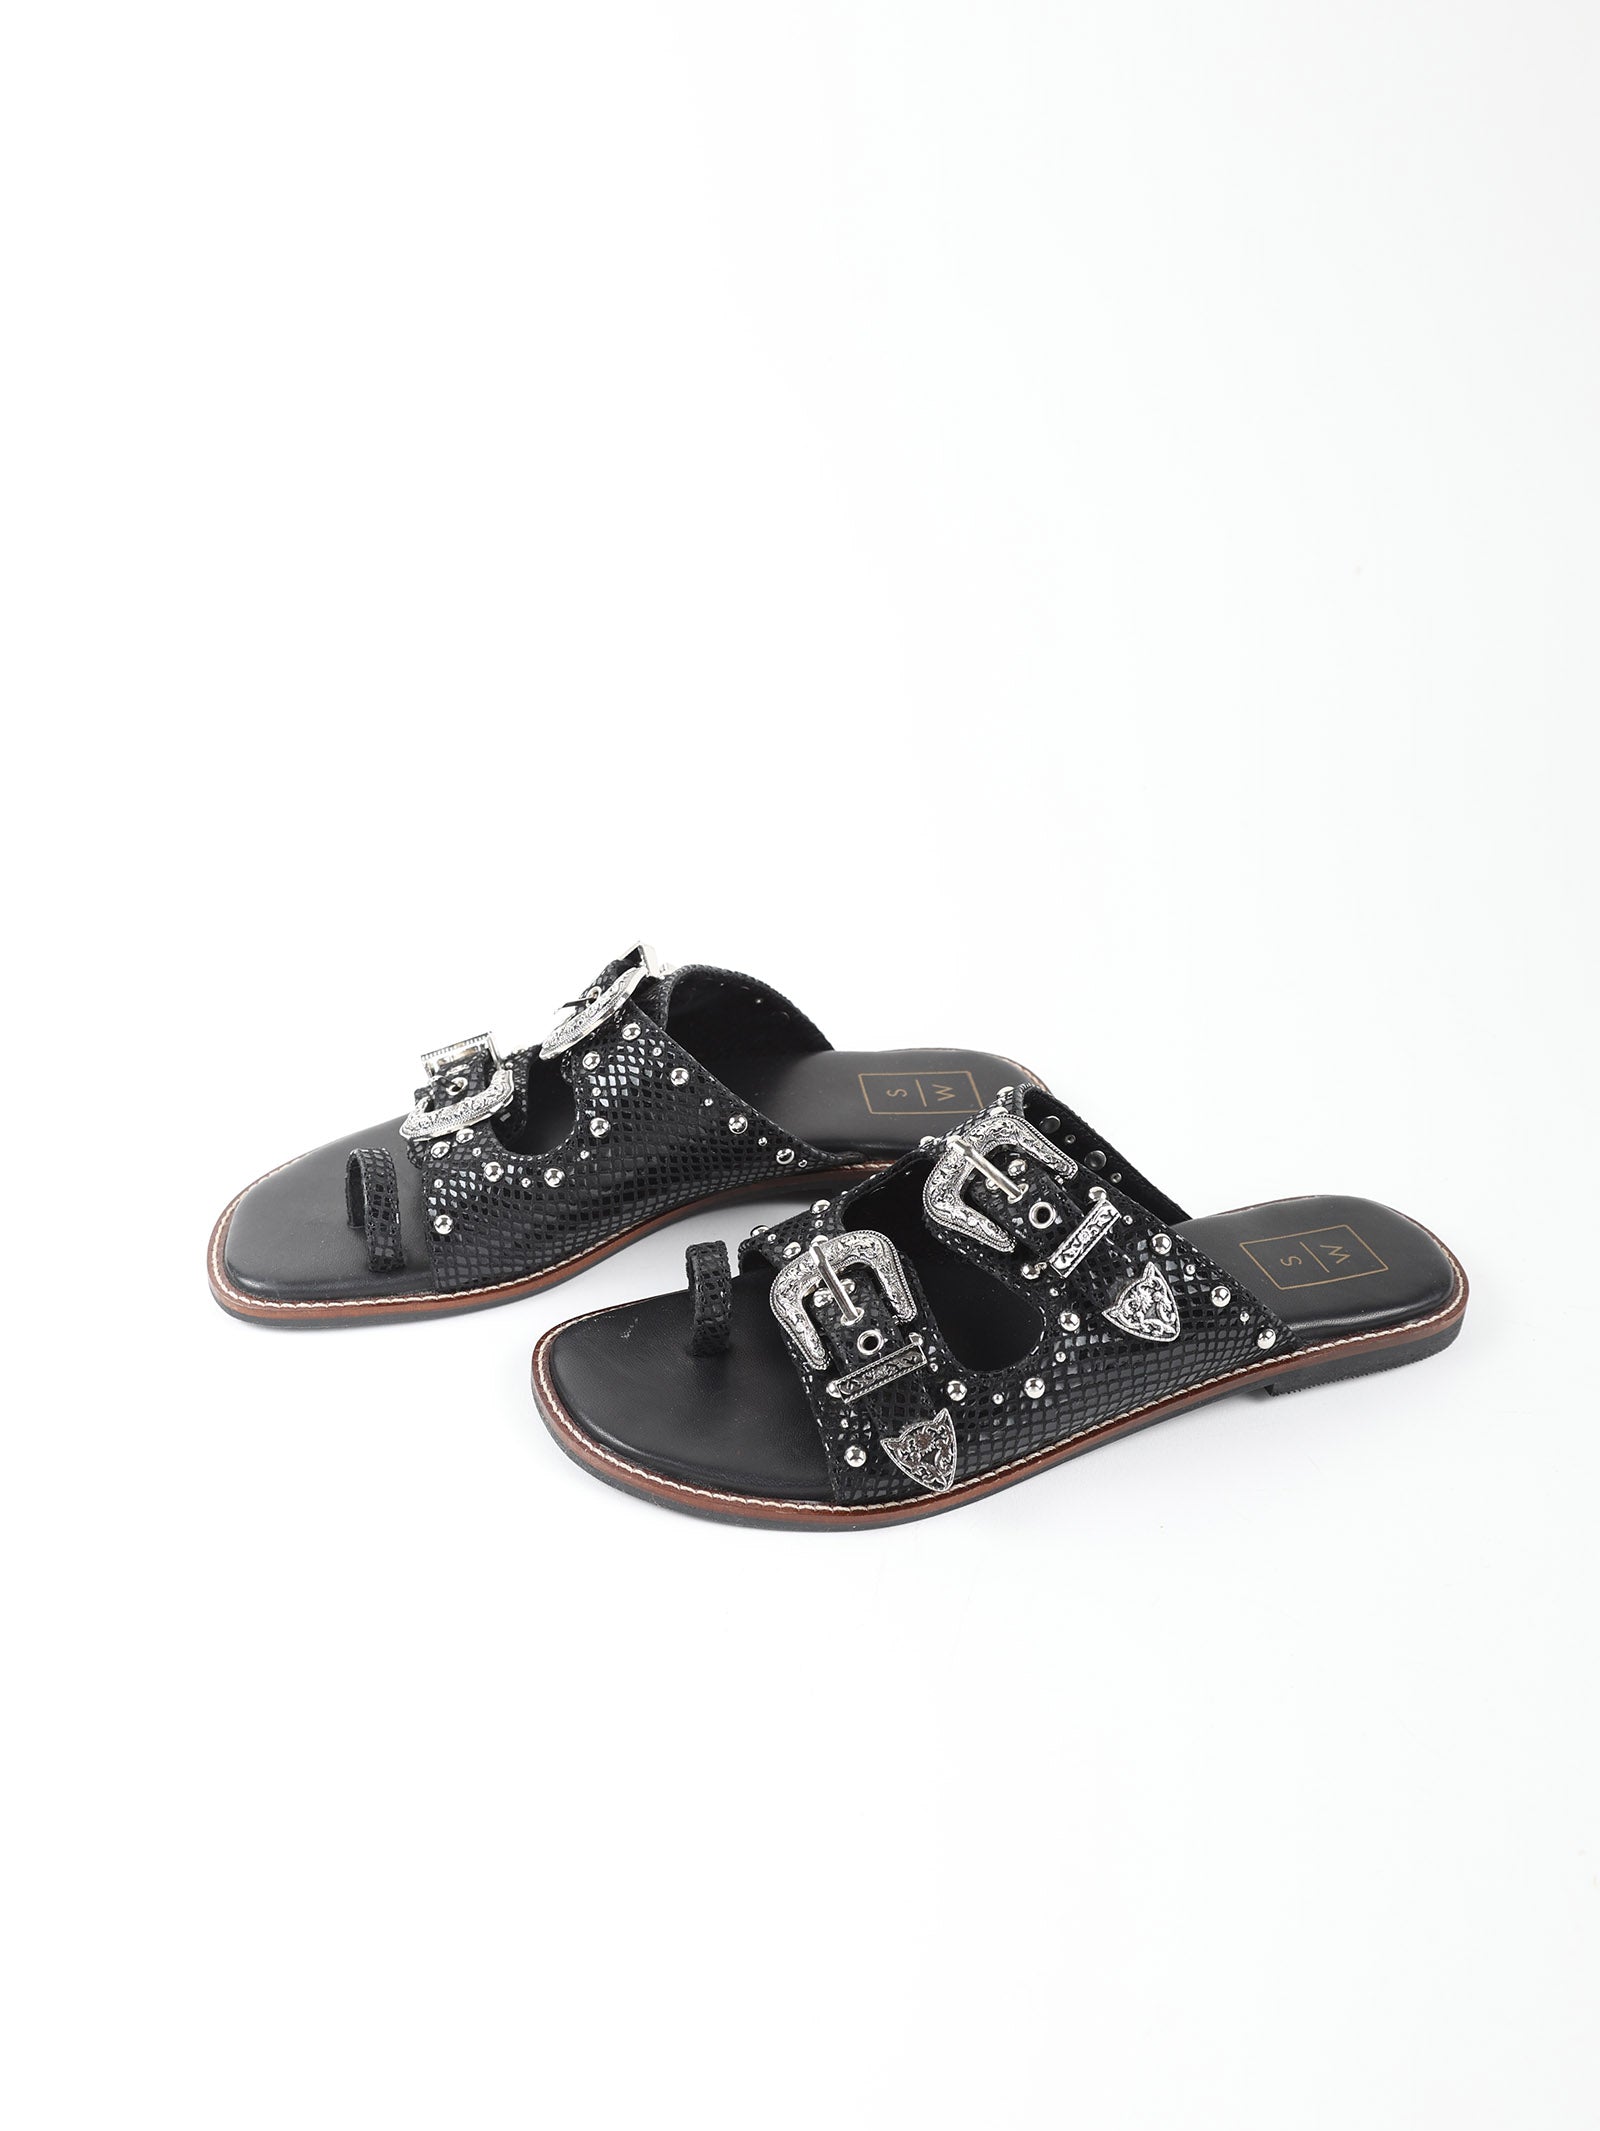 Noreen Black Textured Leather Sandal